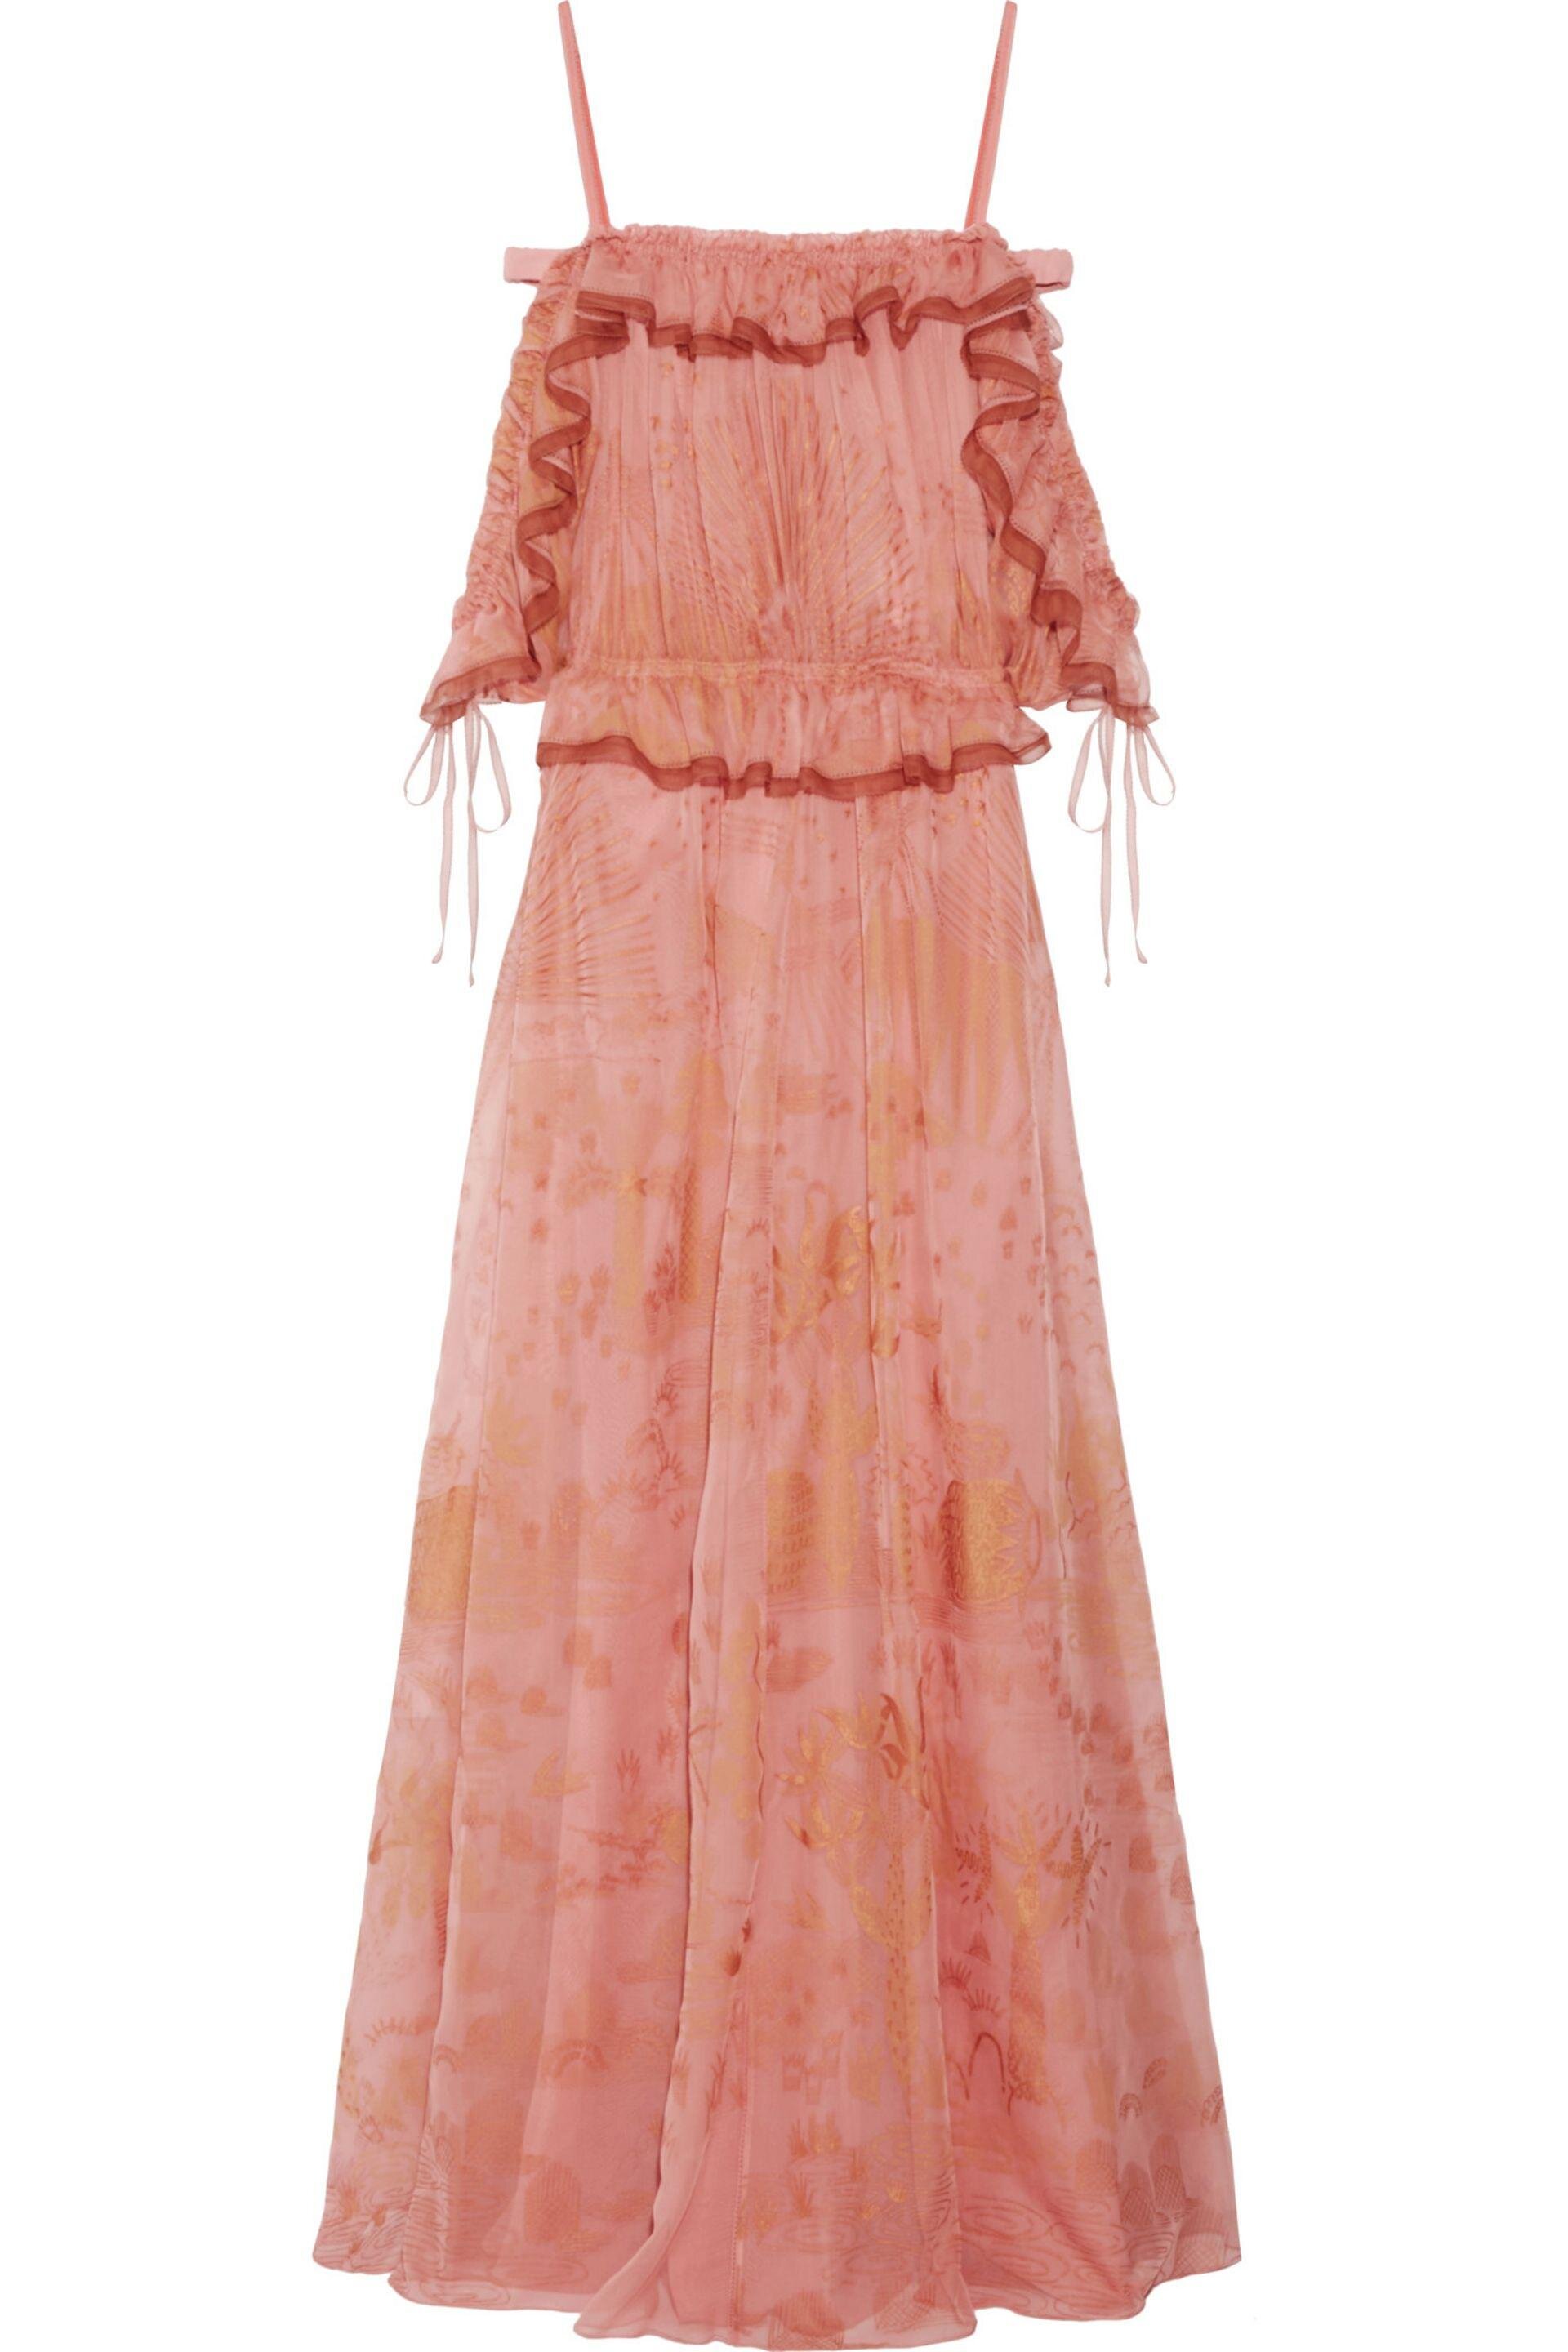 Valentino Off-The-Shoulder Ruffled Printed Gown in Antique Rose.jpg